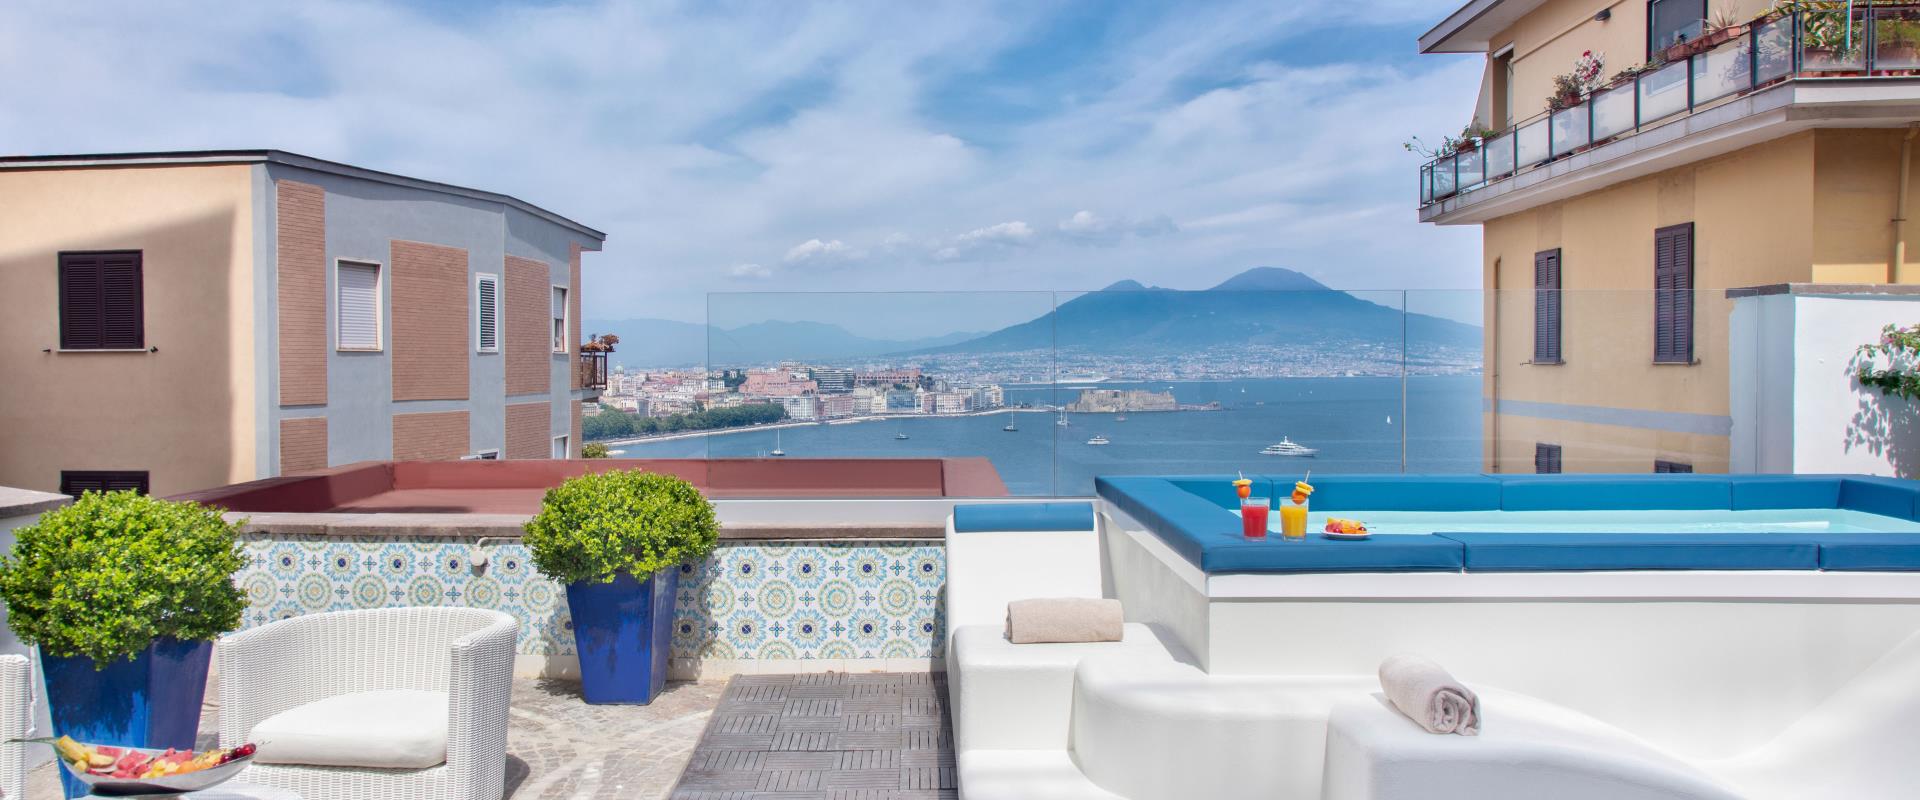 A refreshing bath with a view of the Gulf of Naples